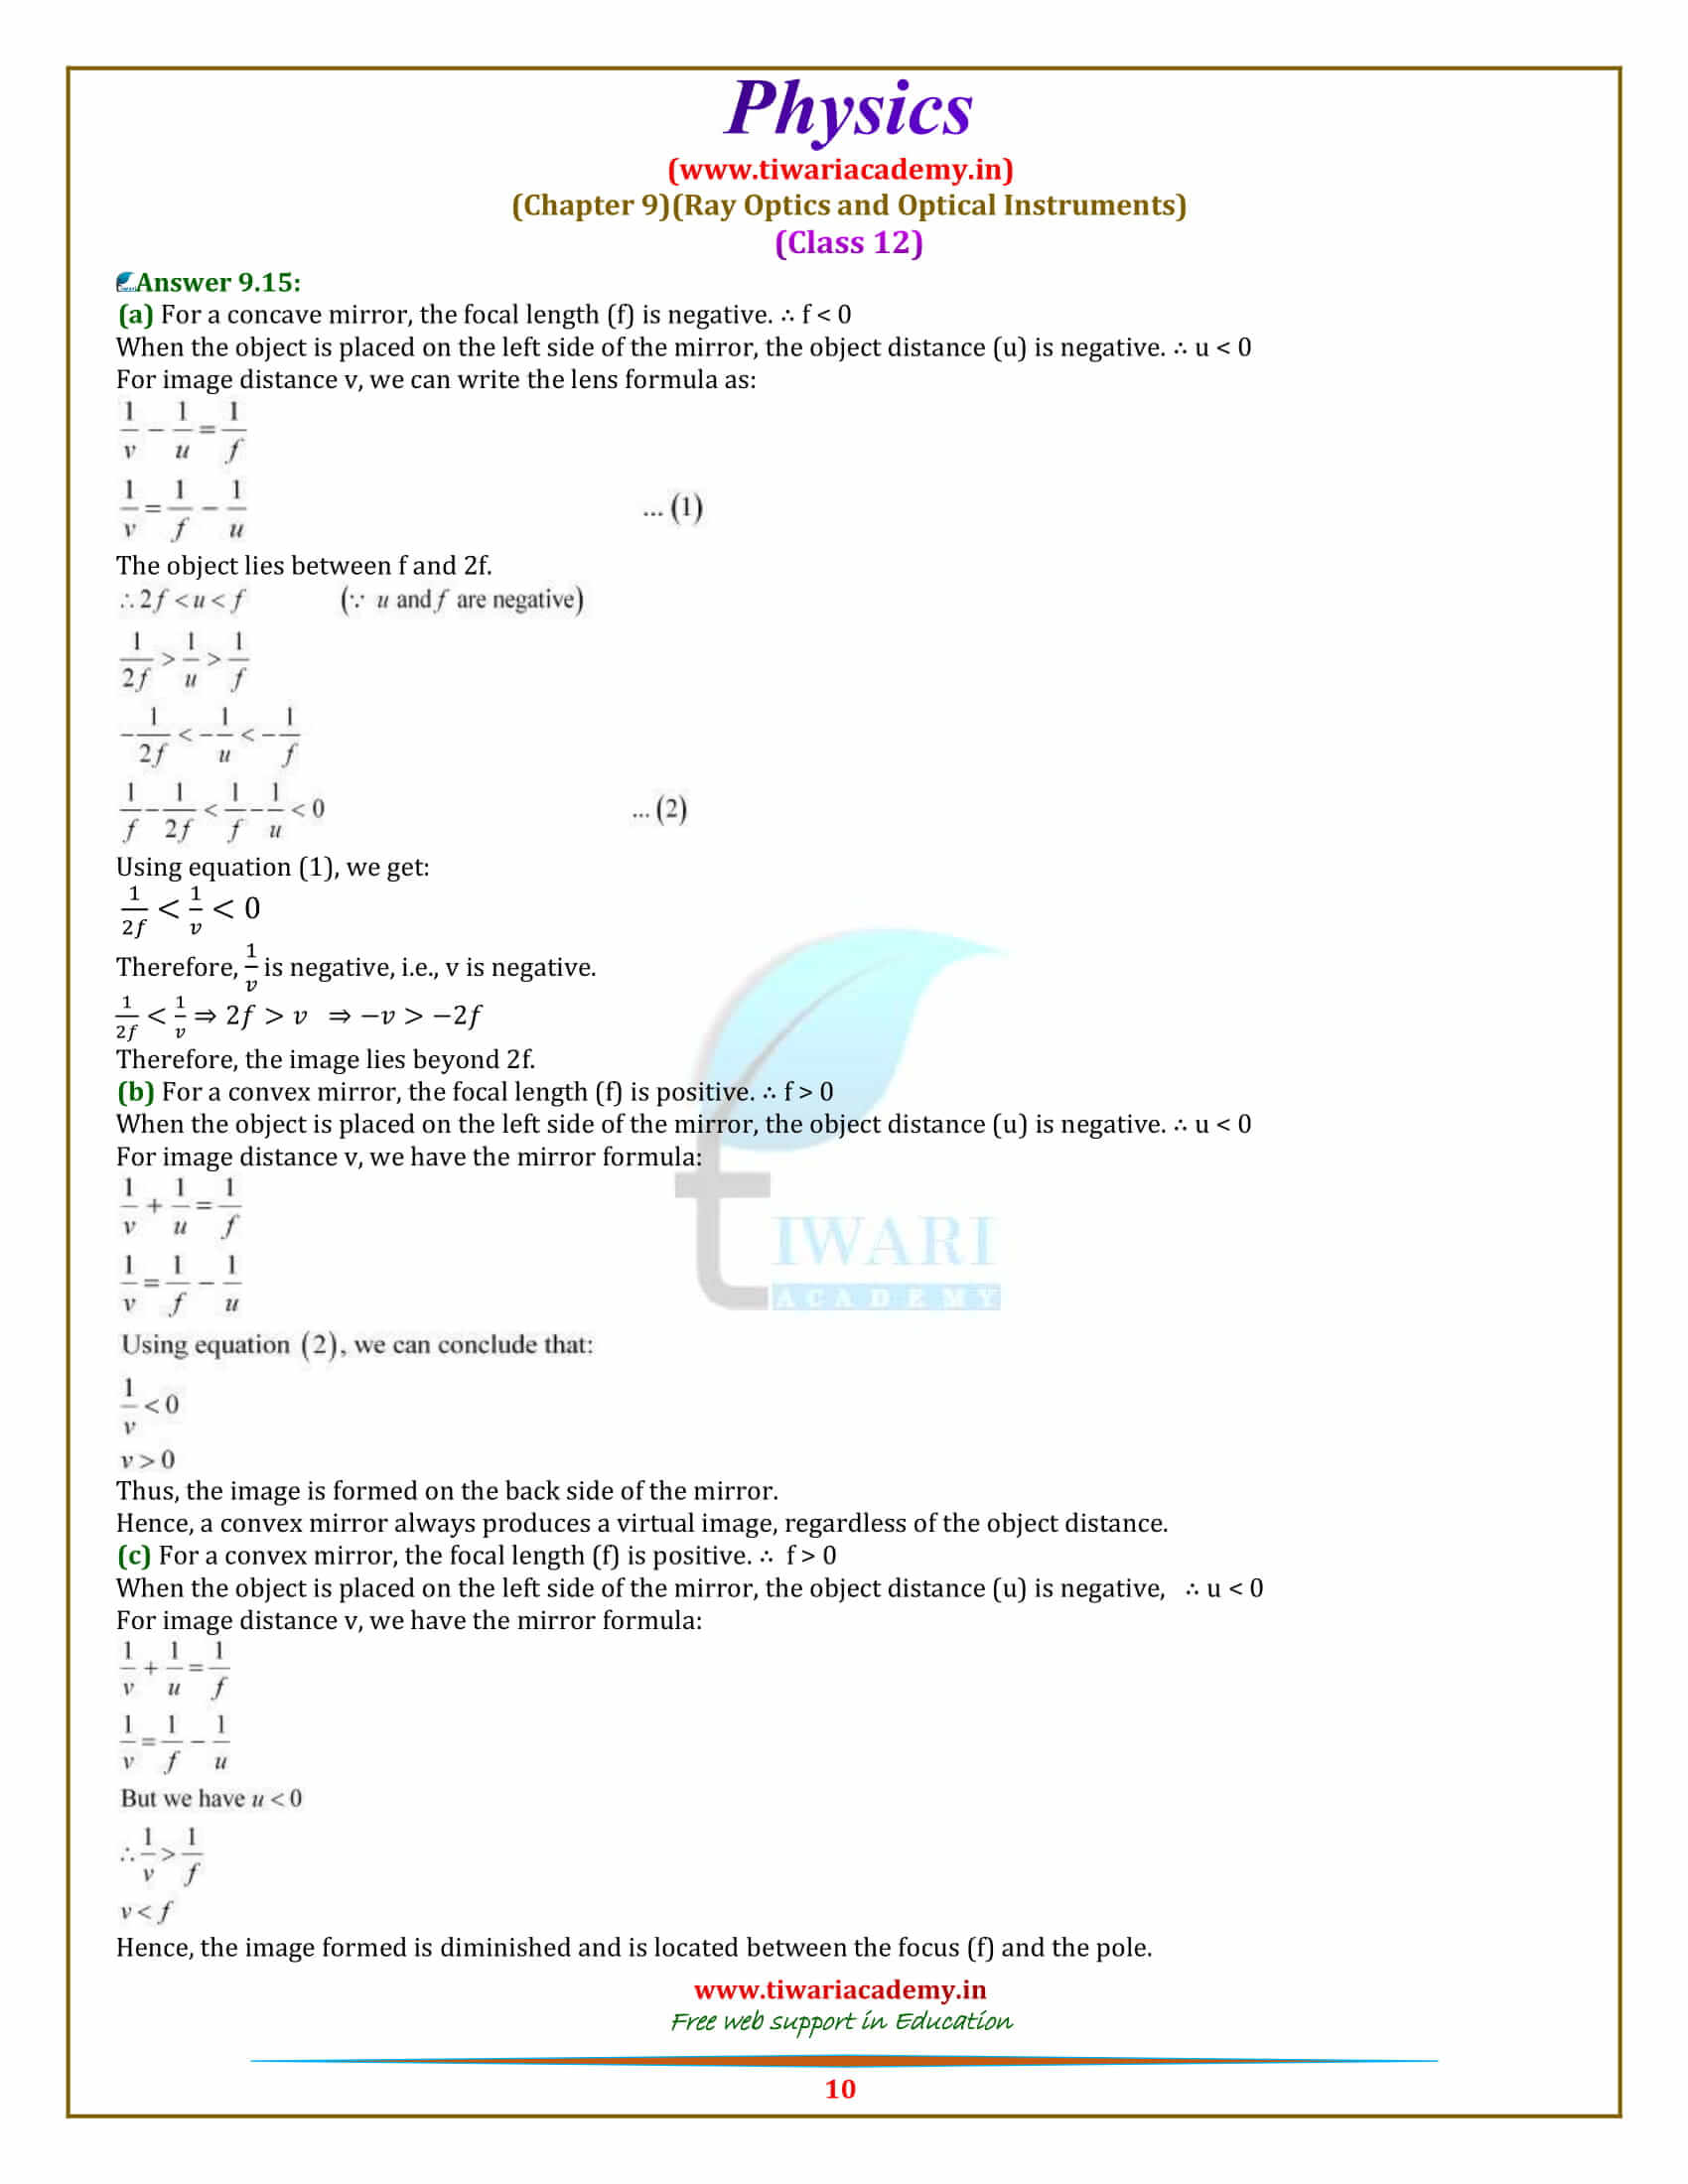 NCERT Solutions for Class 12 Physics Chapter 9 download free